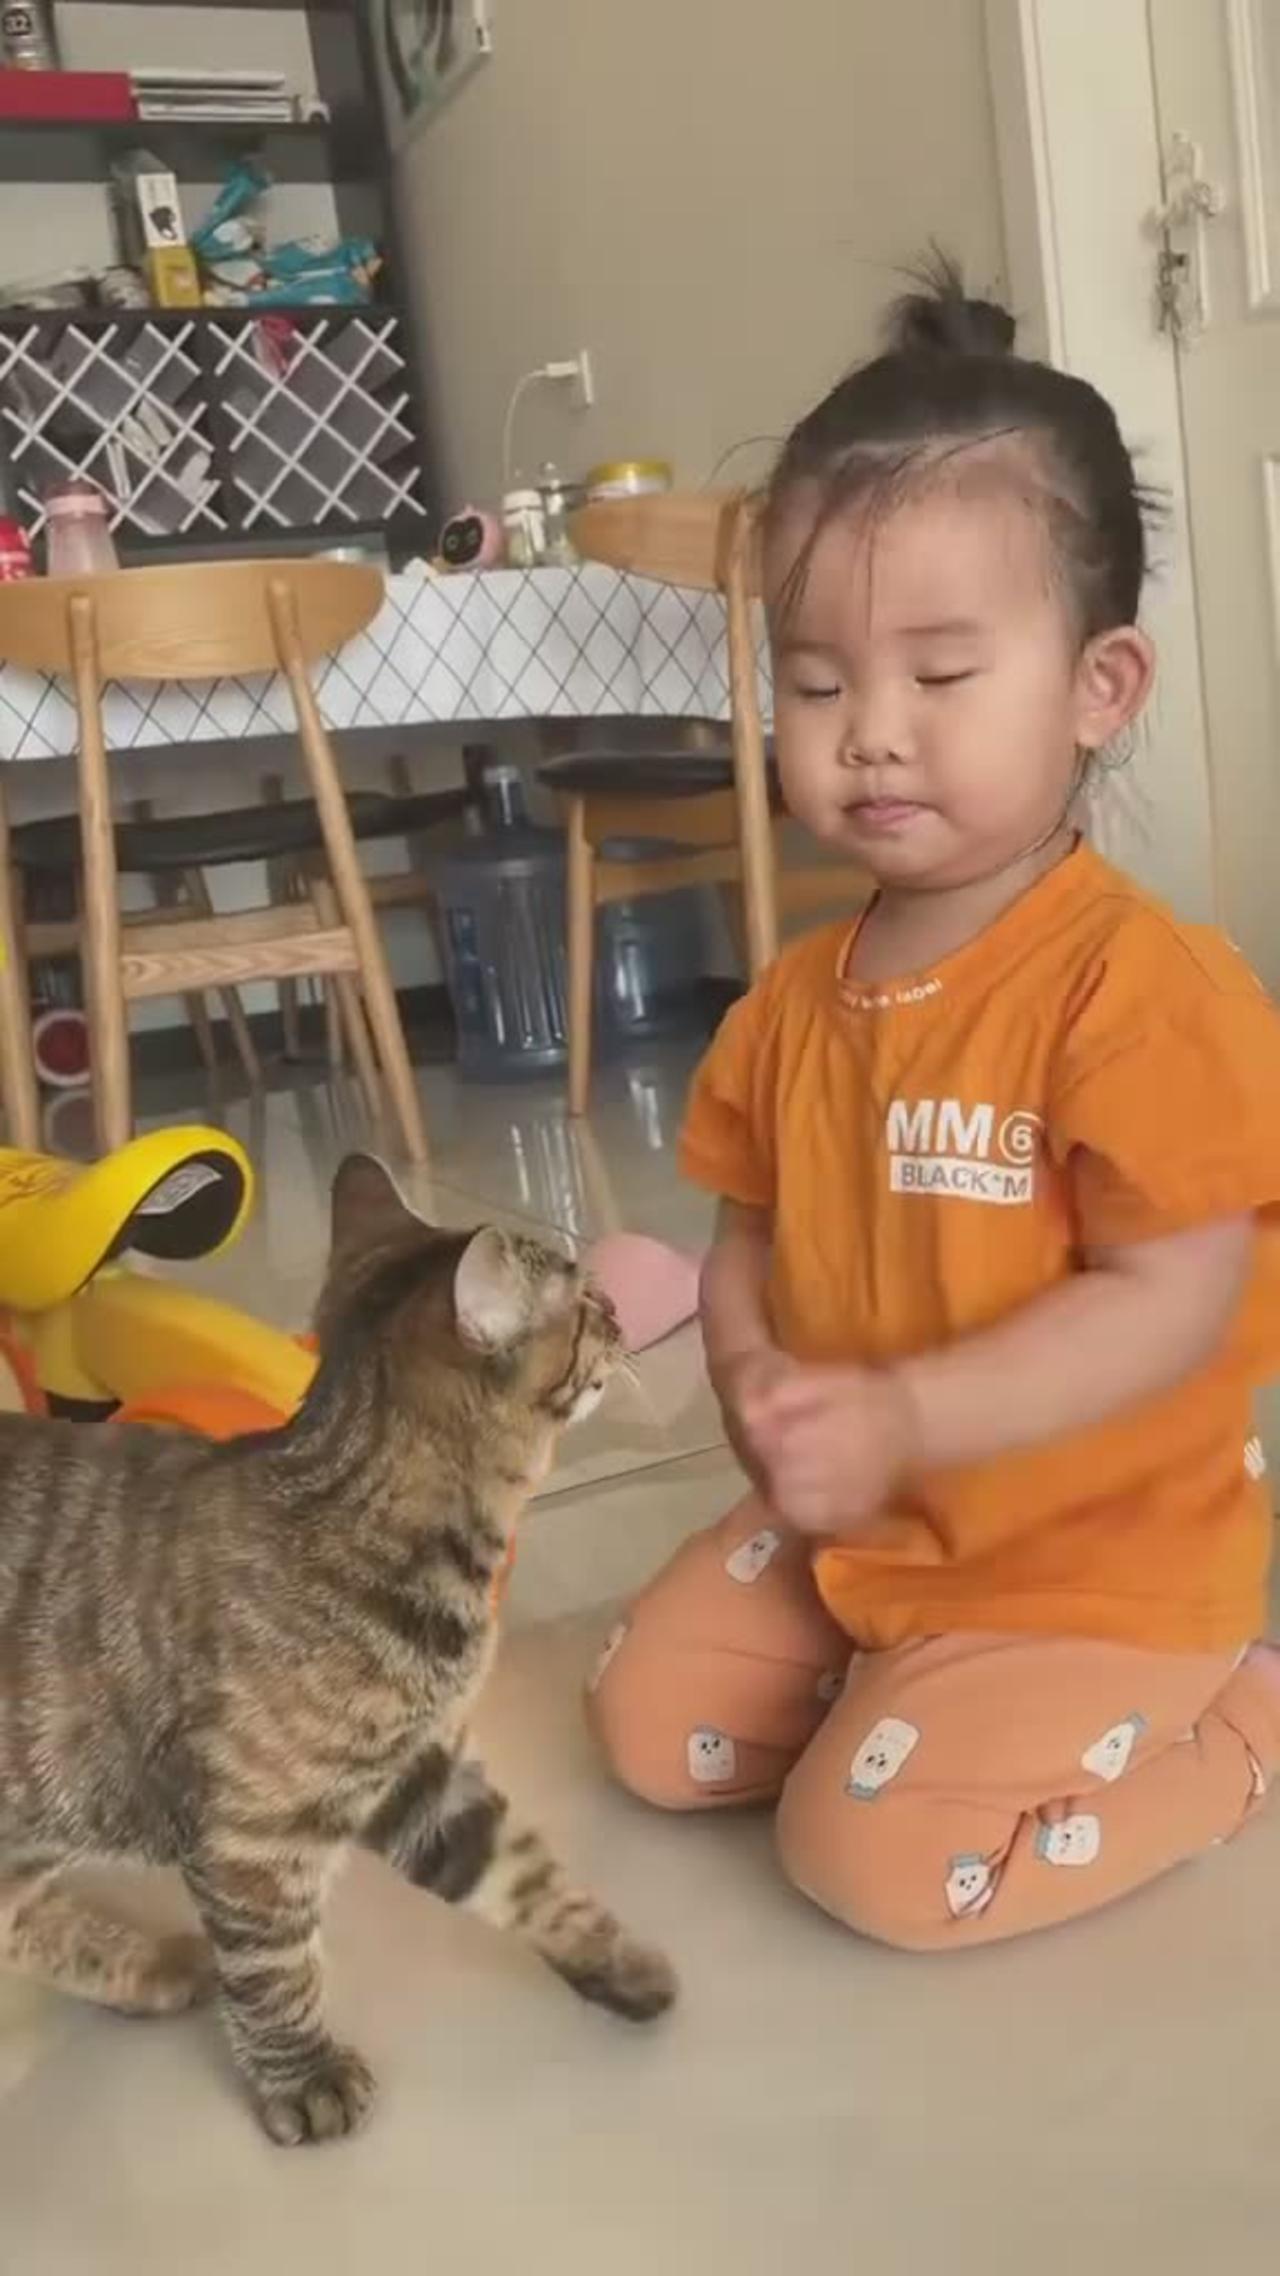 A cute cat playing with cute baby girl 😍😍awesome moment